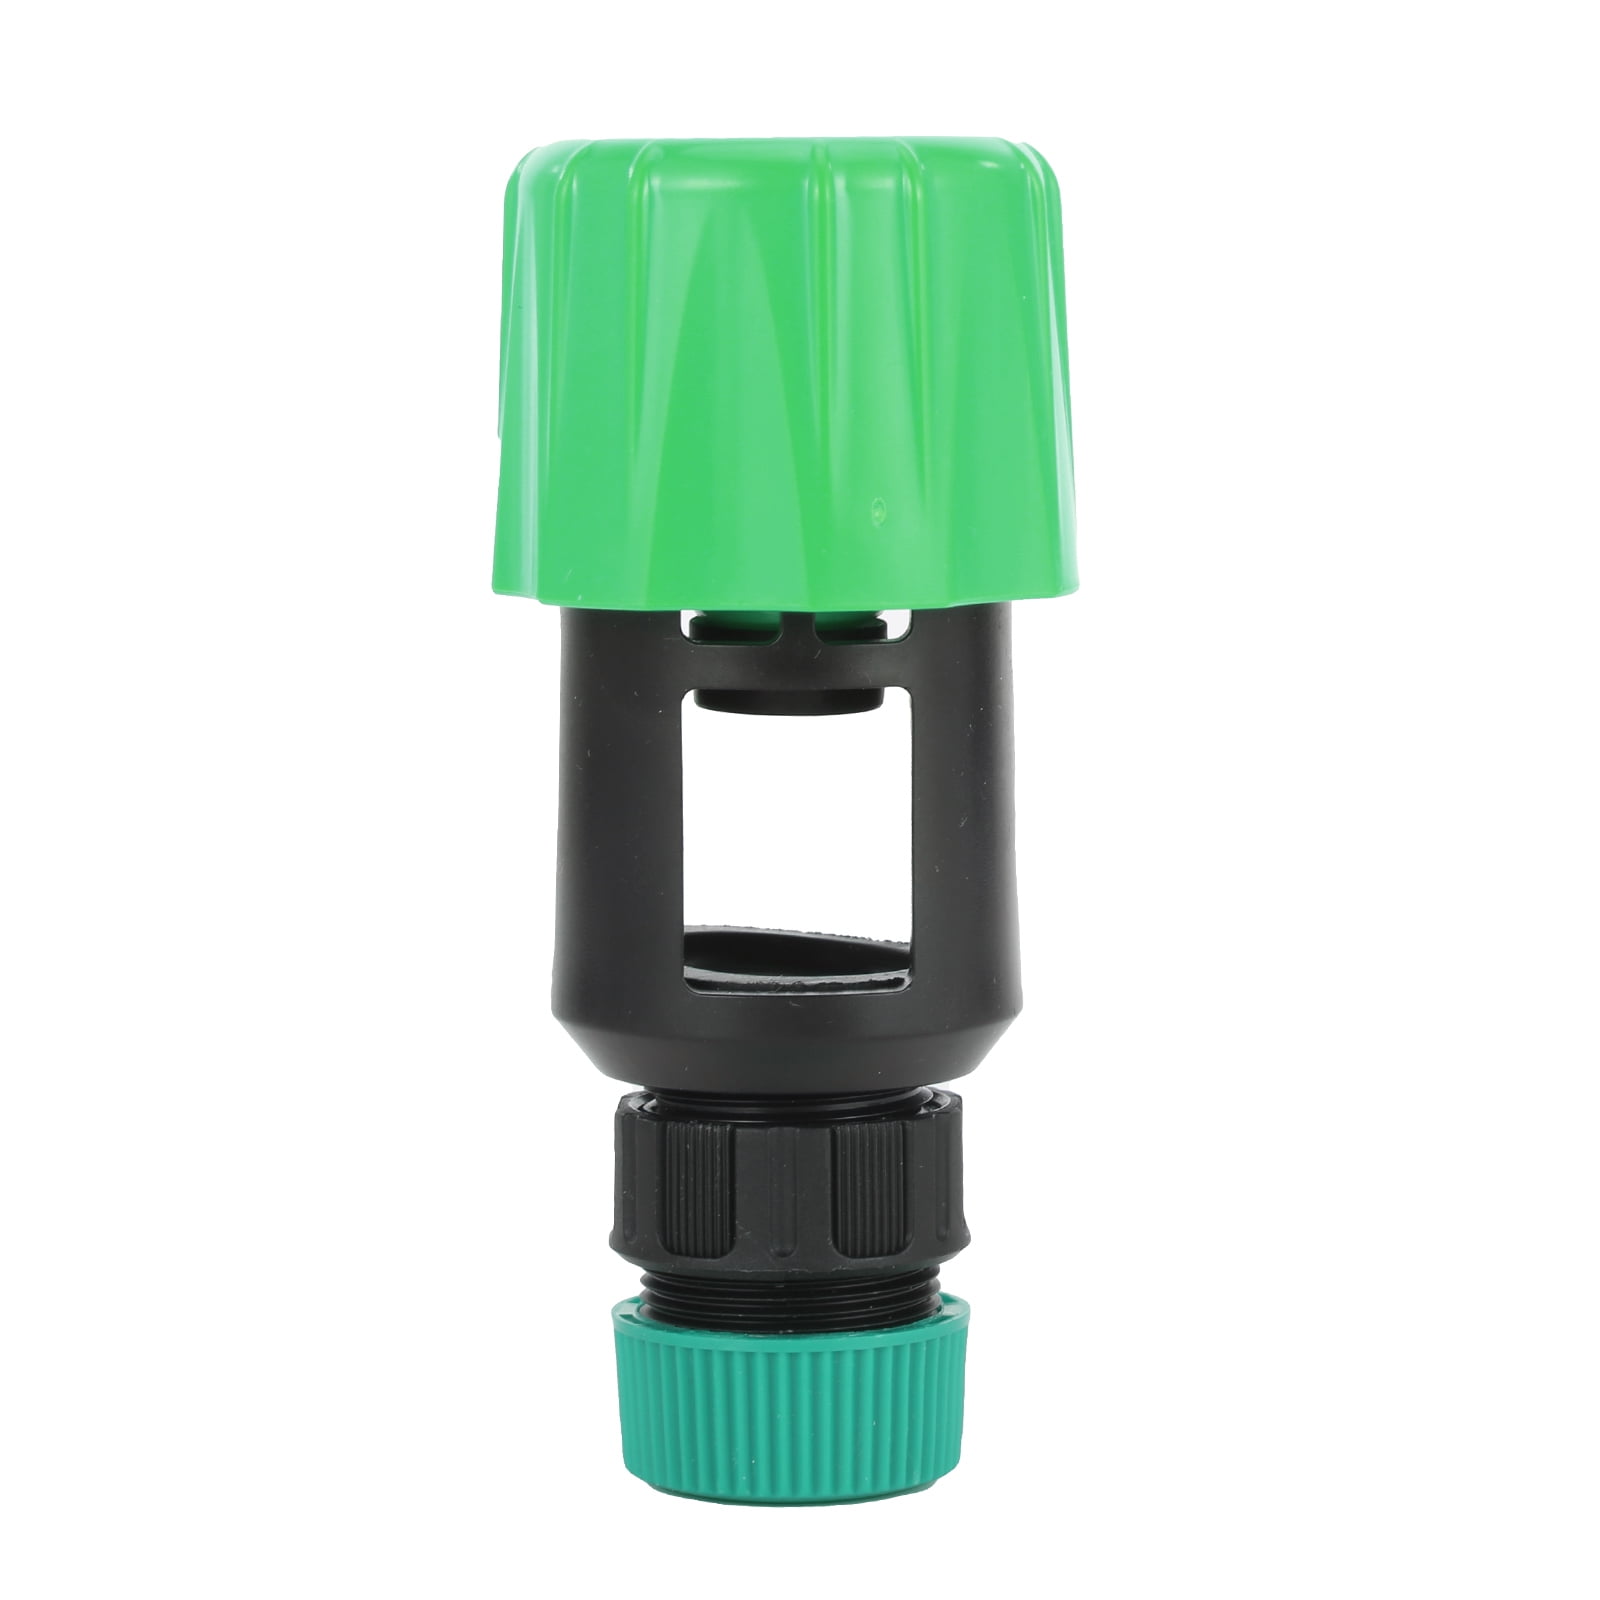 New Green Blade 4 Tap Swivel TAP ADAPTOR Hosepipe Connection 